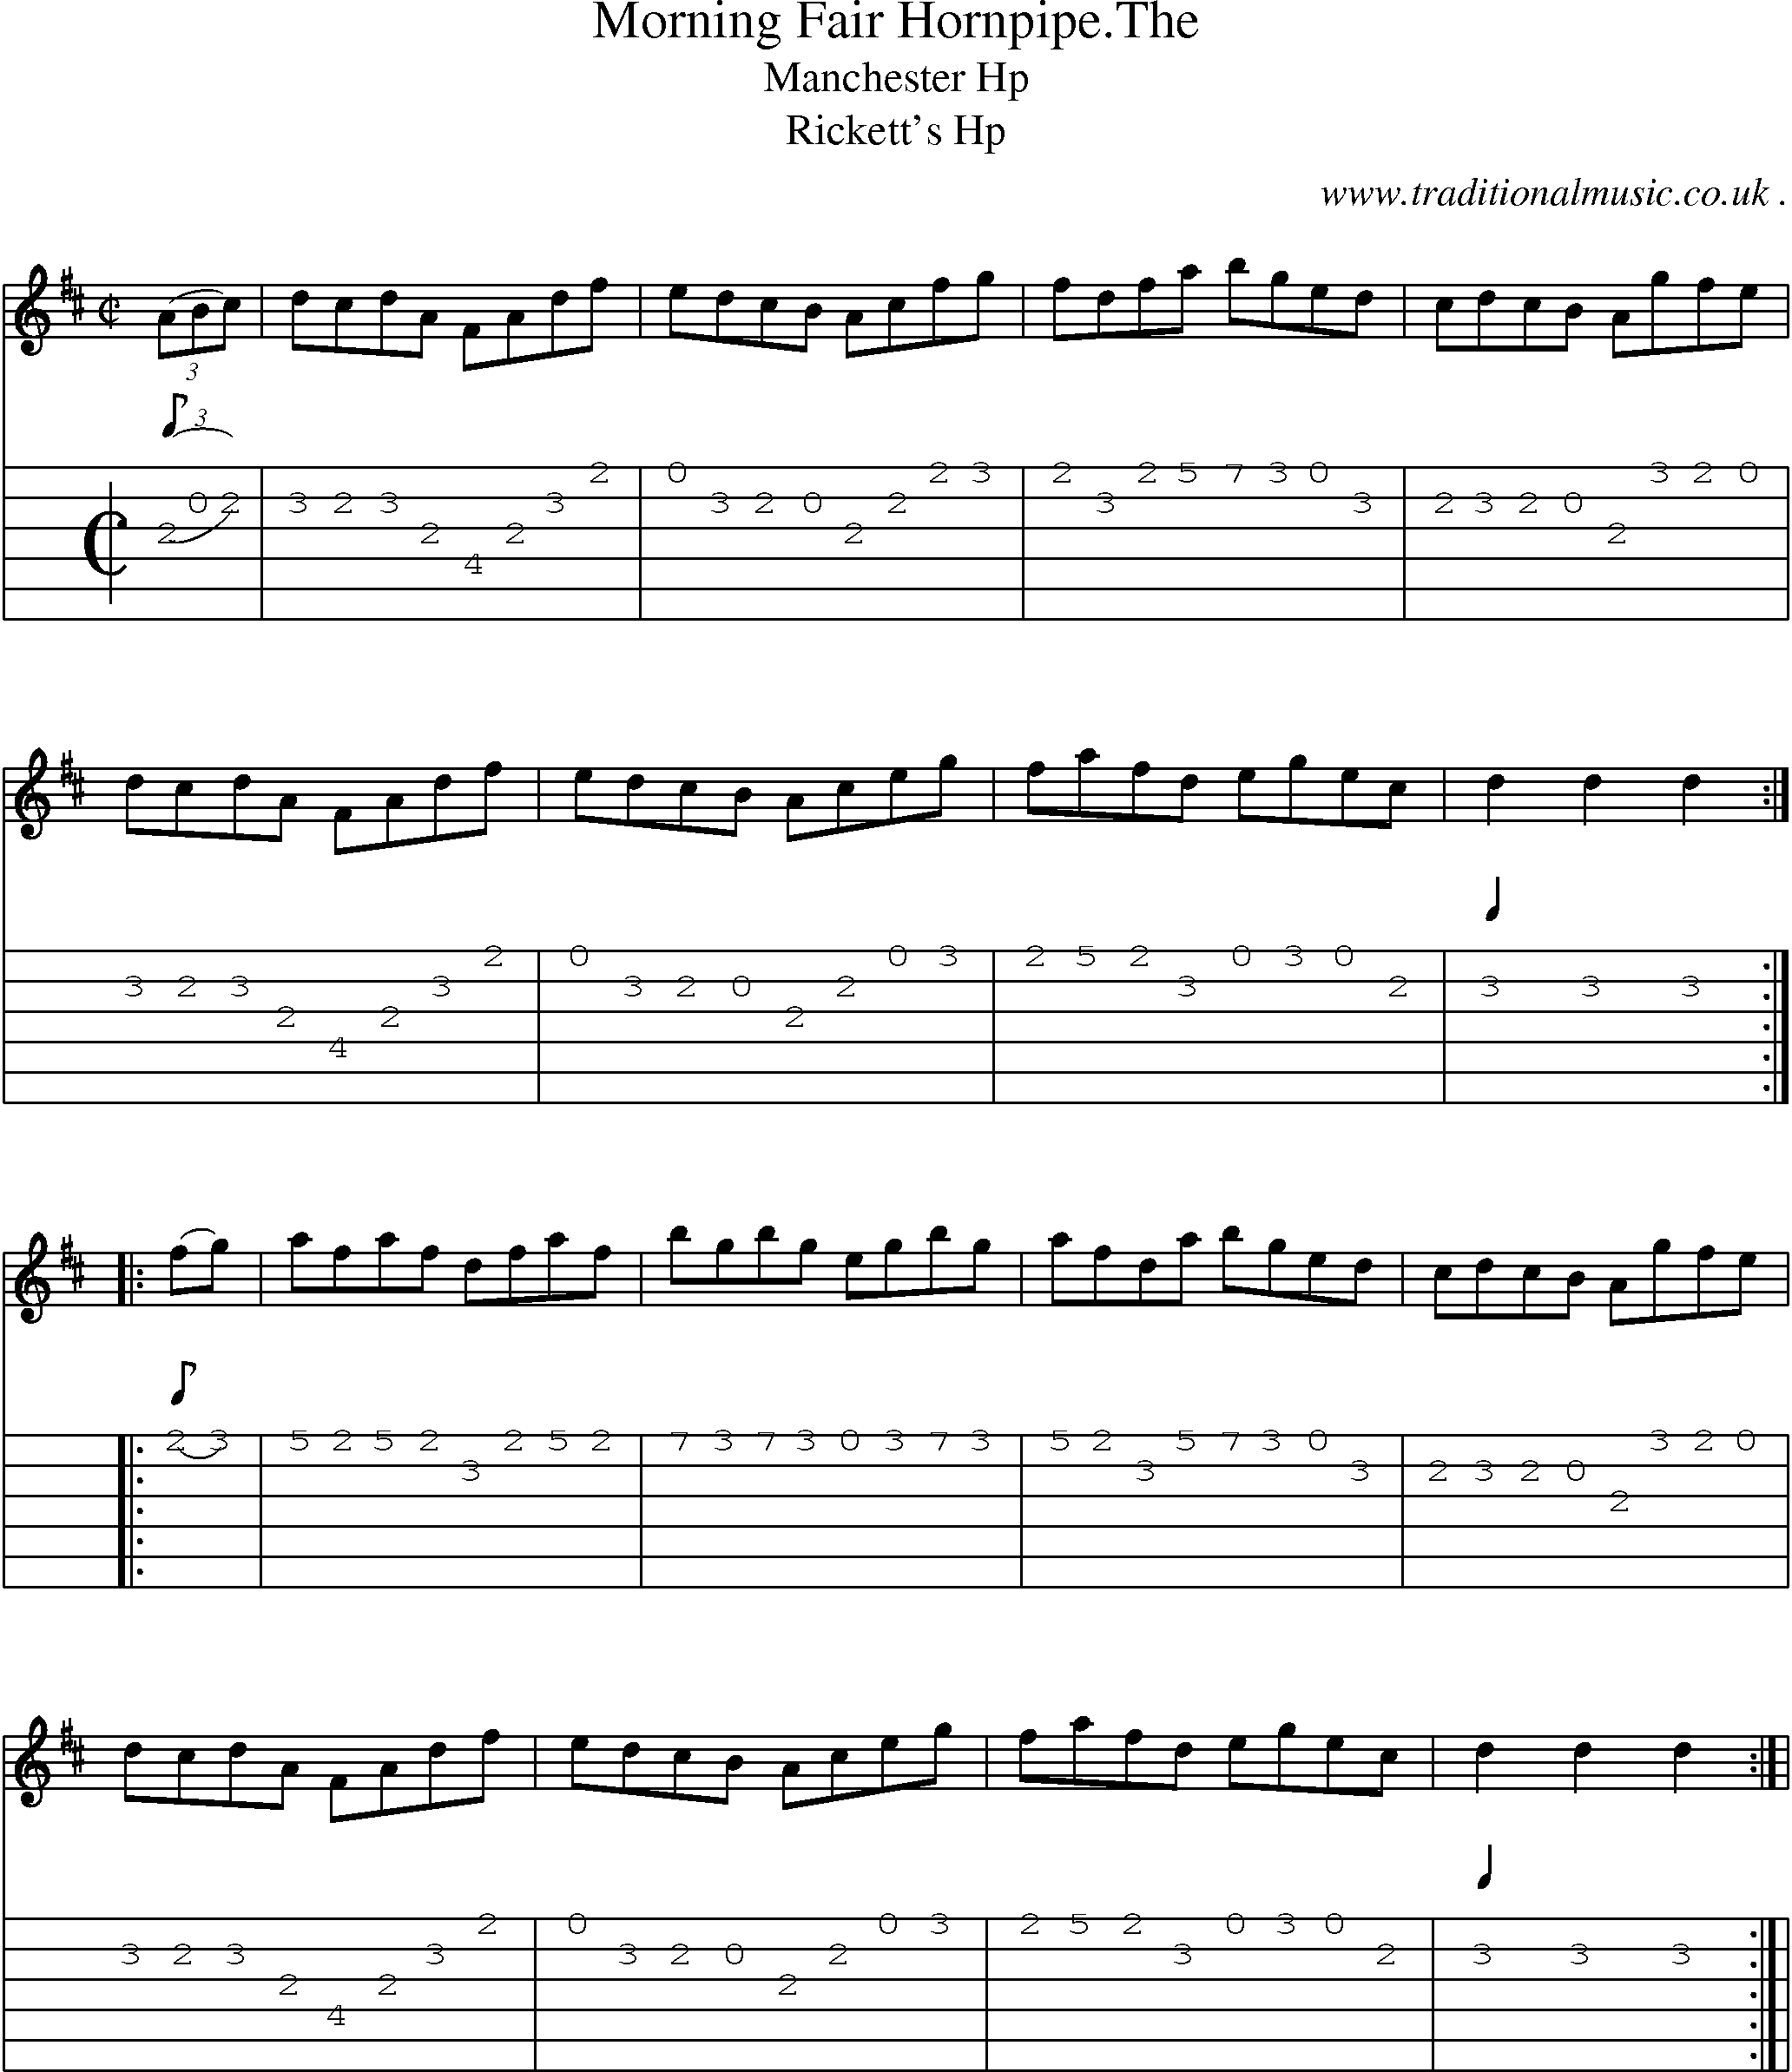 Sheet-Music and Guitar Tabs for Morning Fair Hornpipethe